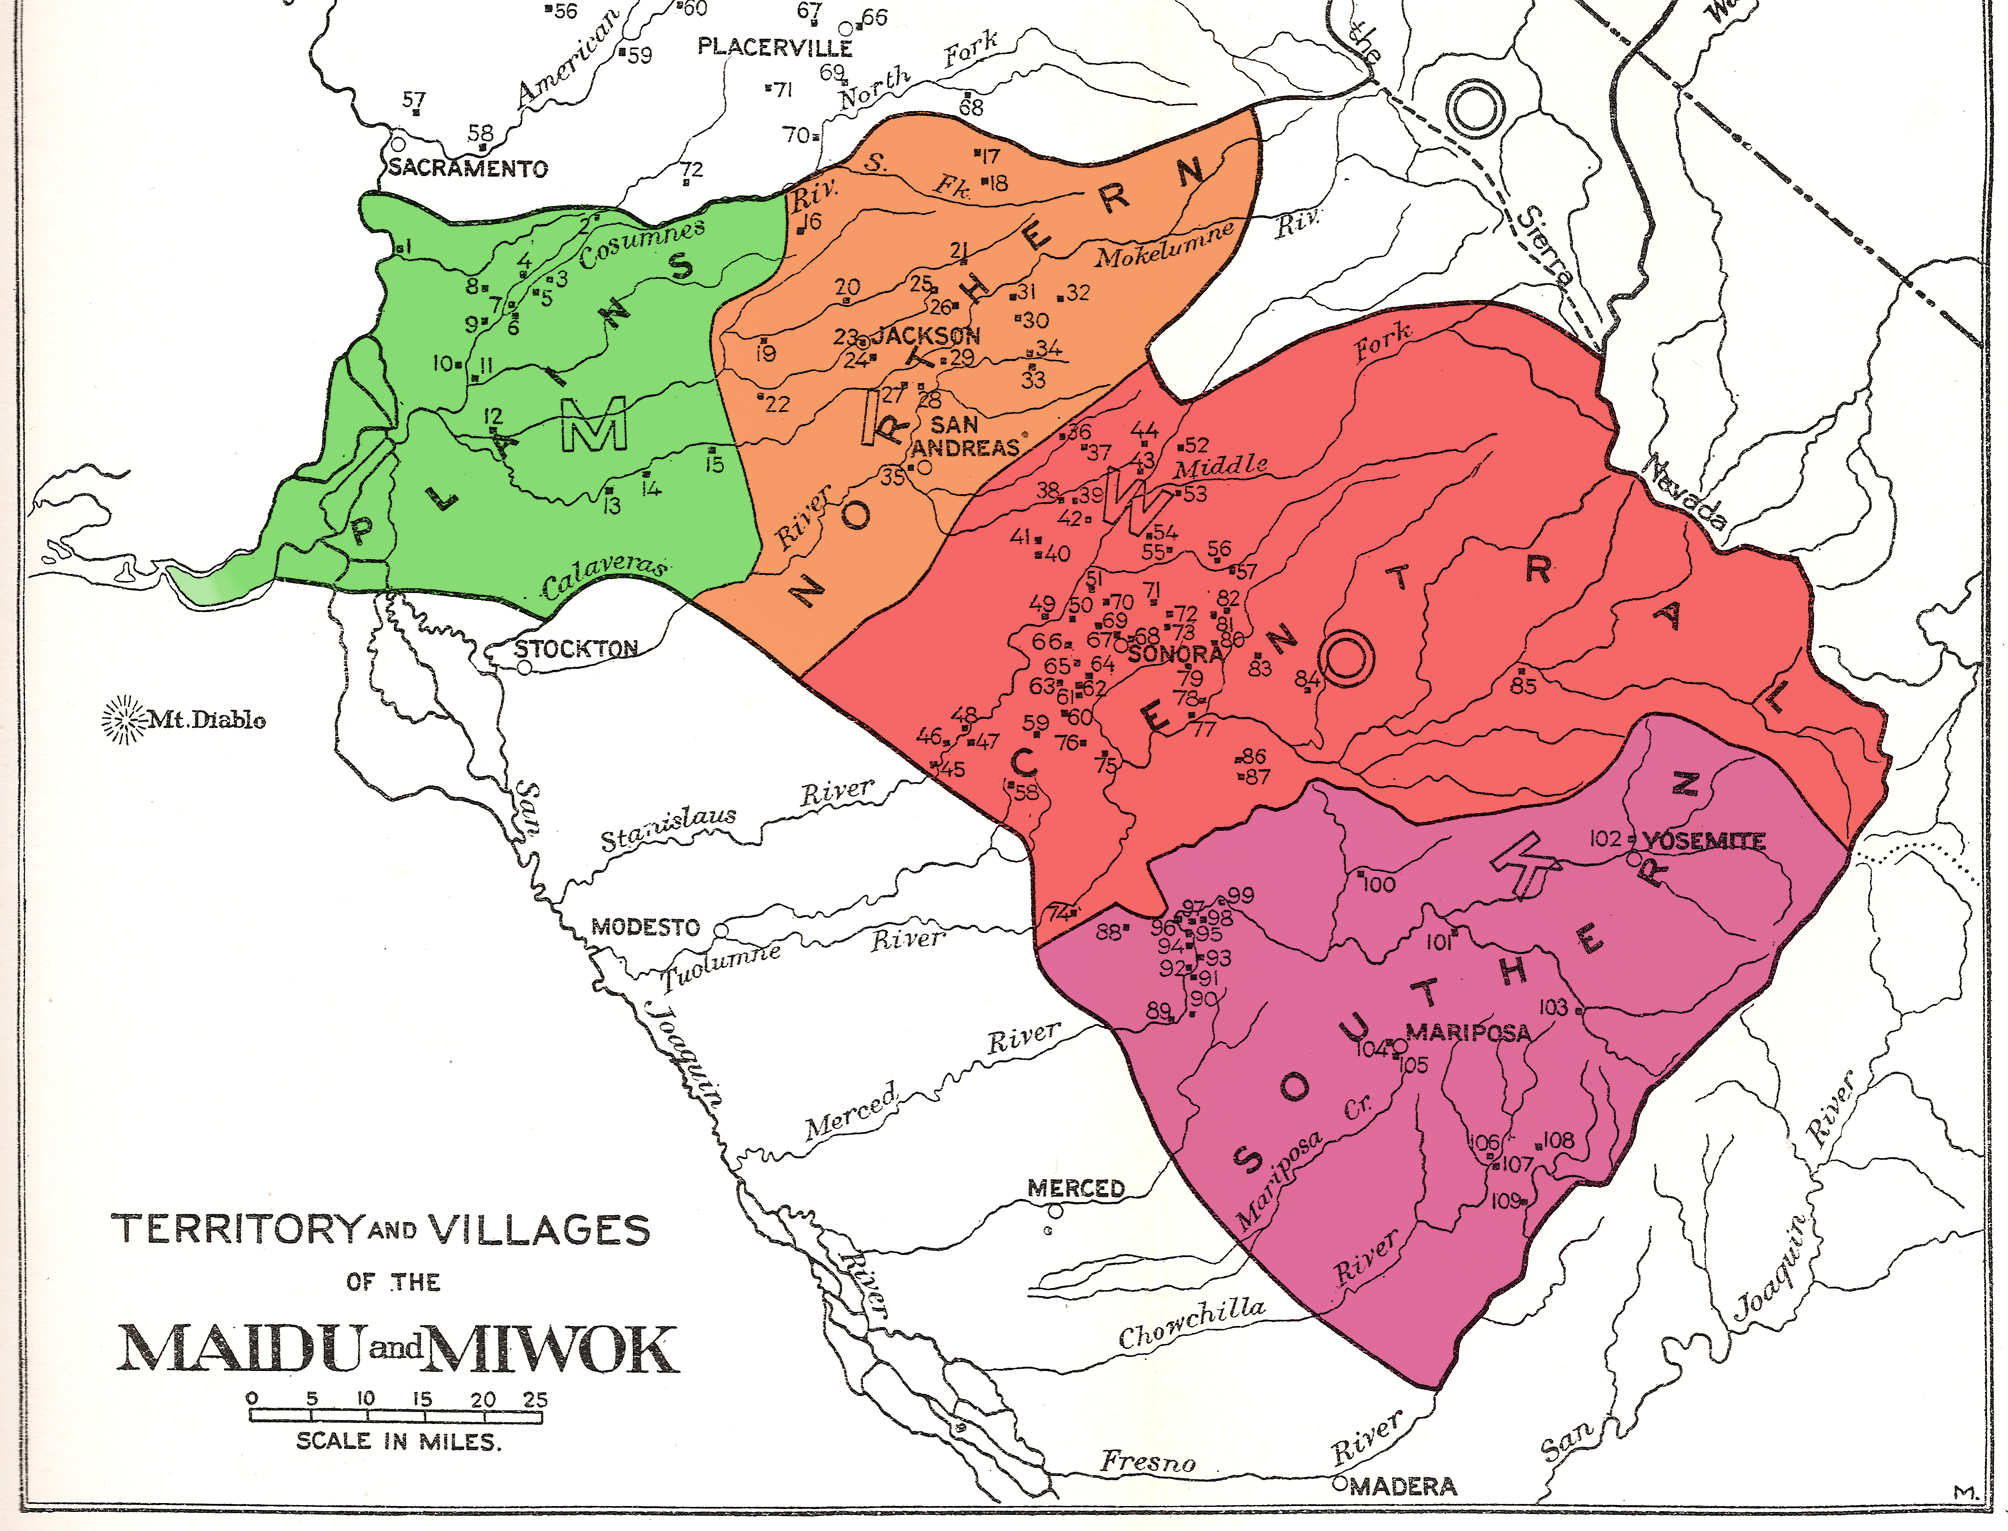 Map of the territory and villages (not exhaustive) of the Plains and Sierra Miwok (after Kroeber 1925).